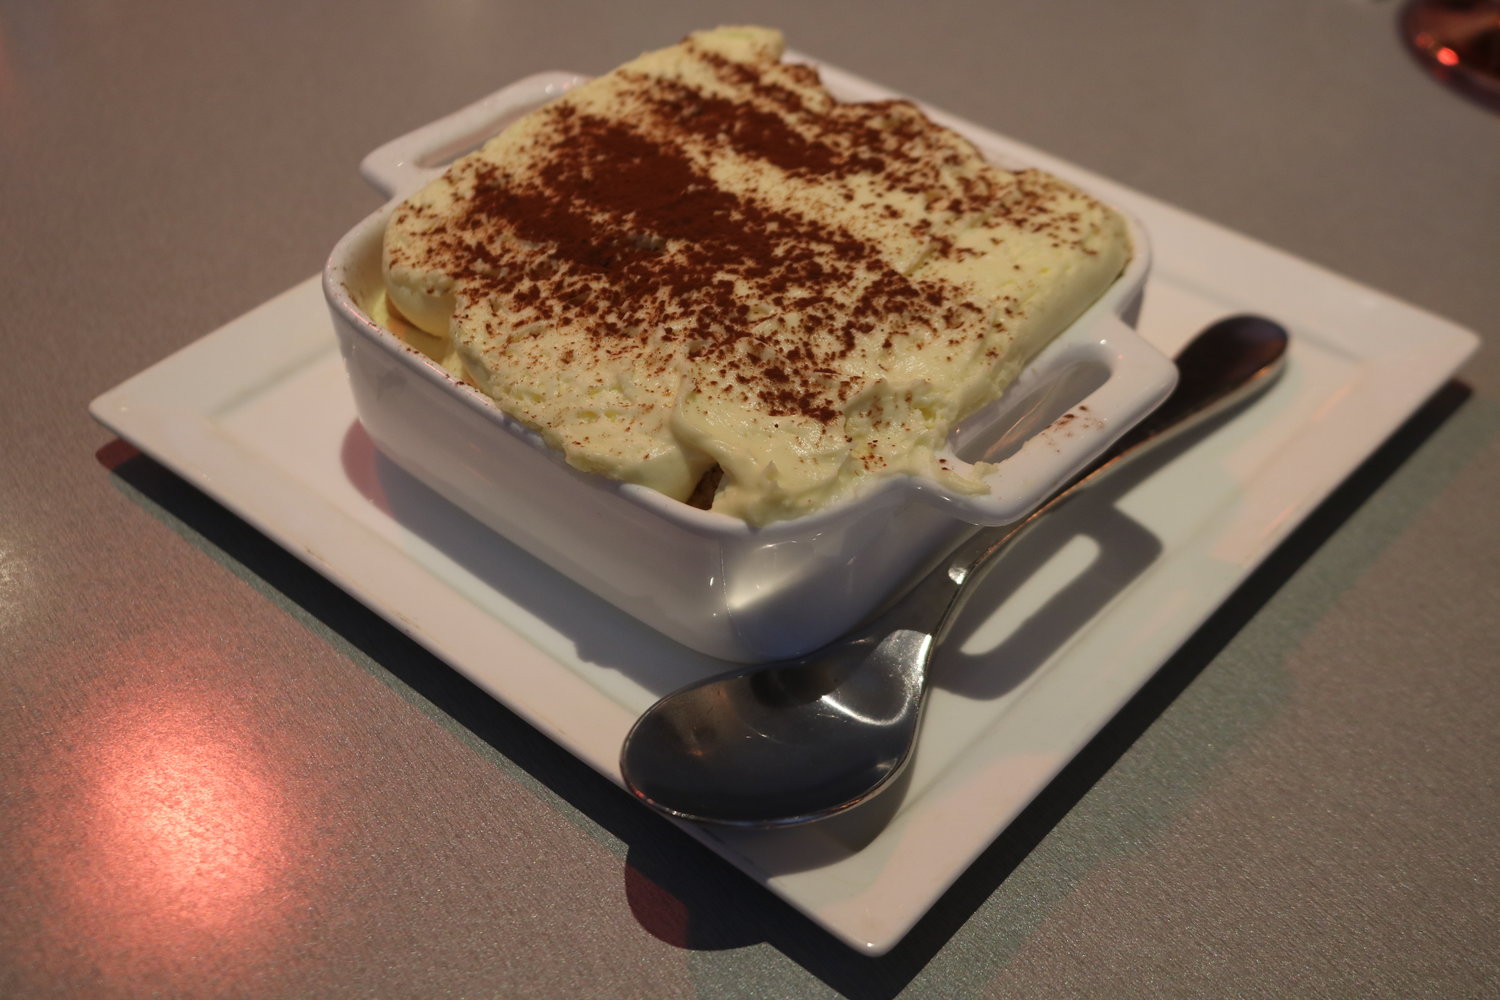 For a light and sweet finish, guests can order a tiramisu to share.